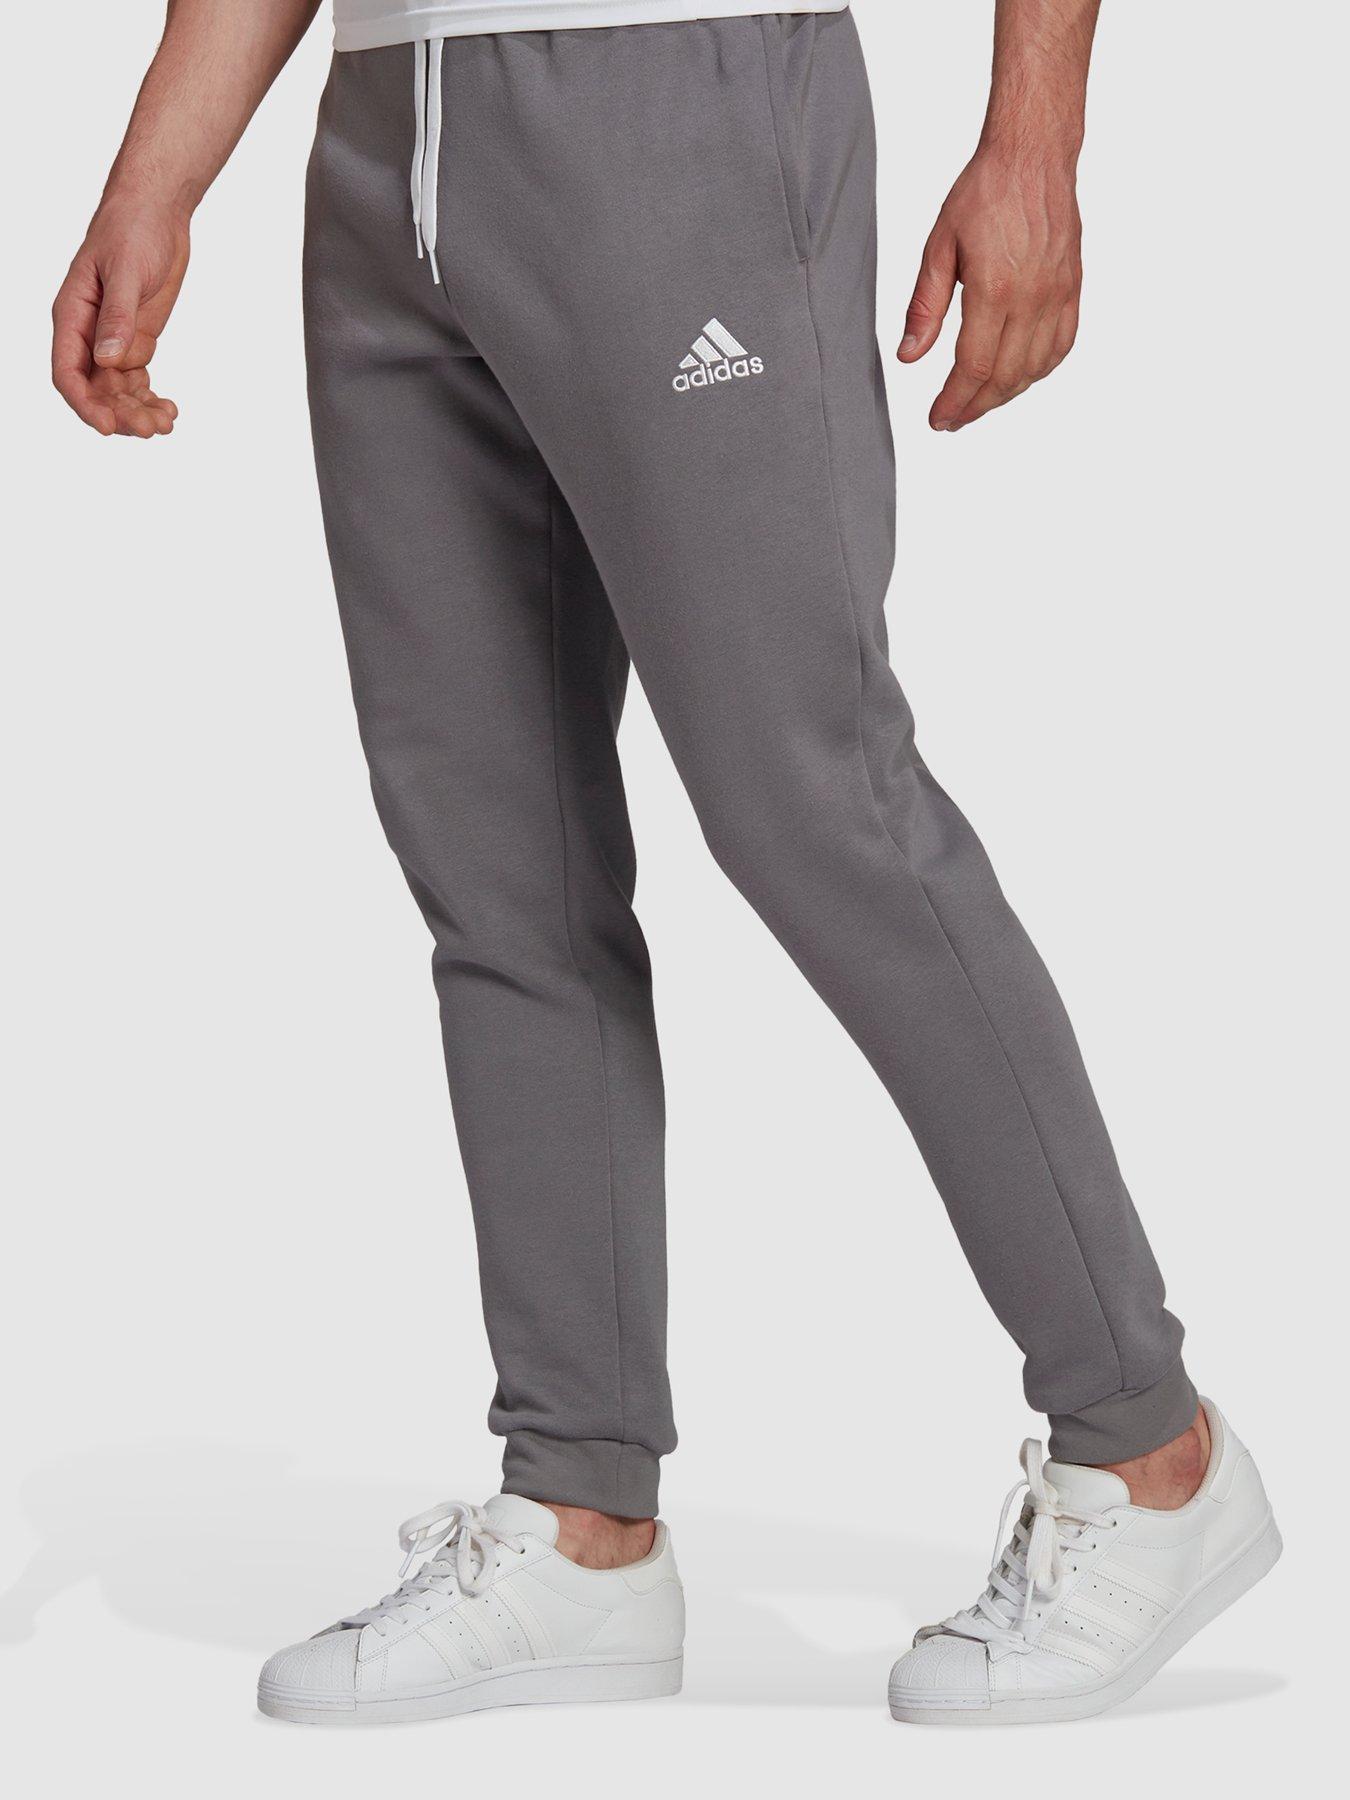 BRAND NEW IN STOCK) Adidas Pants Women's Fashion Boutique Stripe Embroidery  Pants Casual Sports Pants Loose and Comfortable Pants, Women's Fashion,  Bottoms, Jeans & Leggings on Carousell